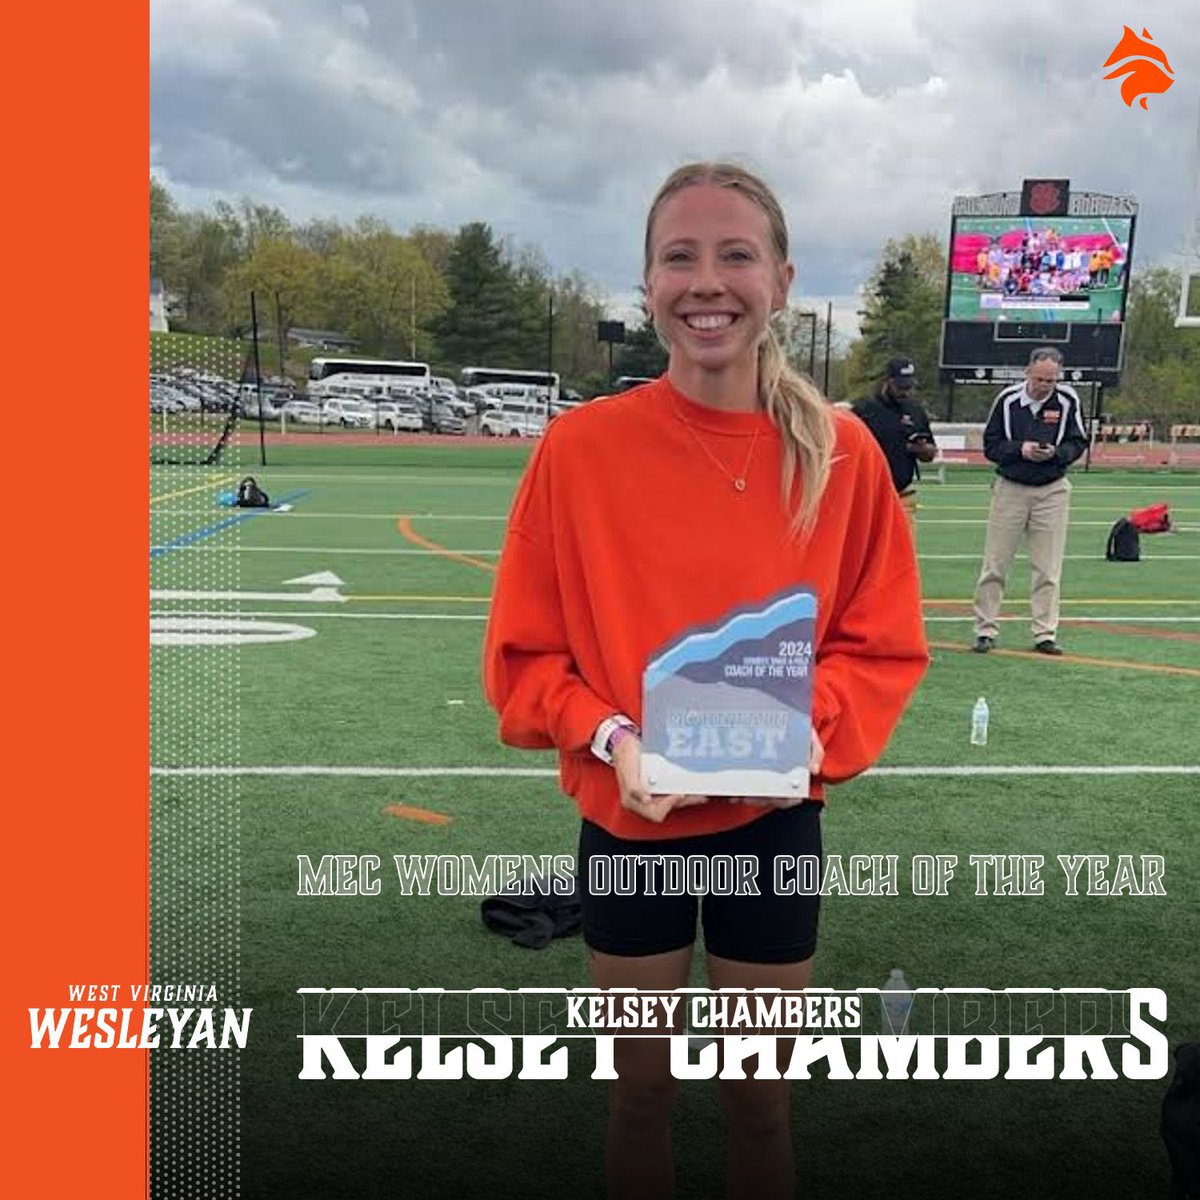 Congratulations to coach Kelsey Chambers of @wvwctrack on receiving Women’s Coach of the Year for the Outdoor Track and Field Season !